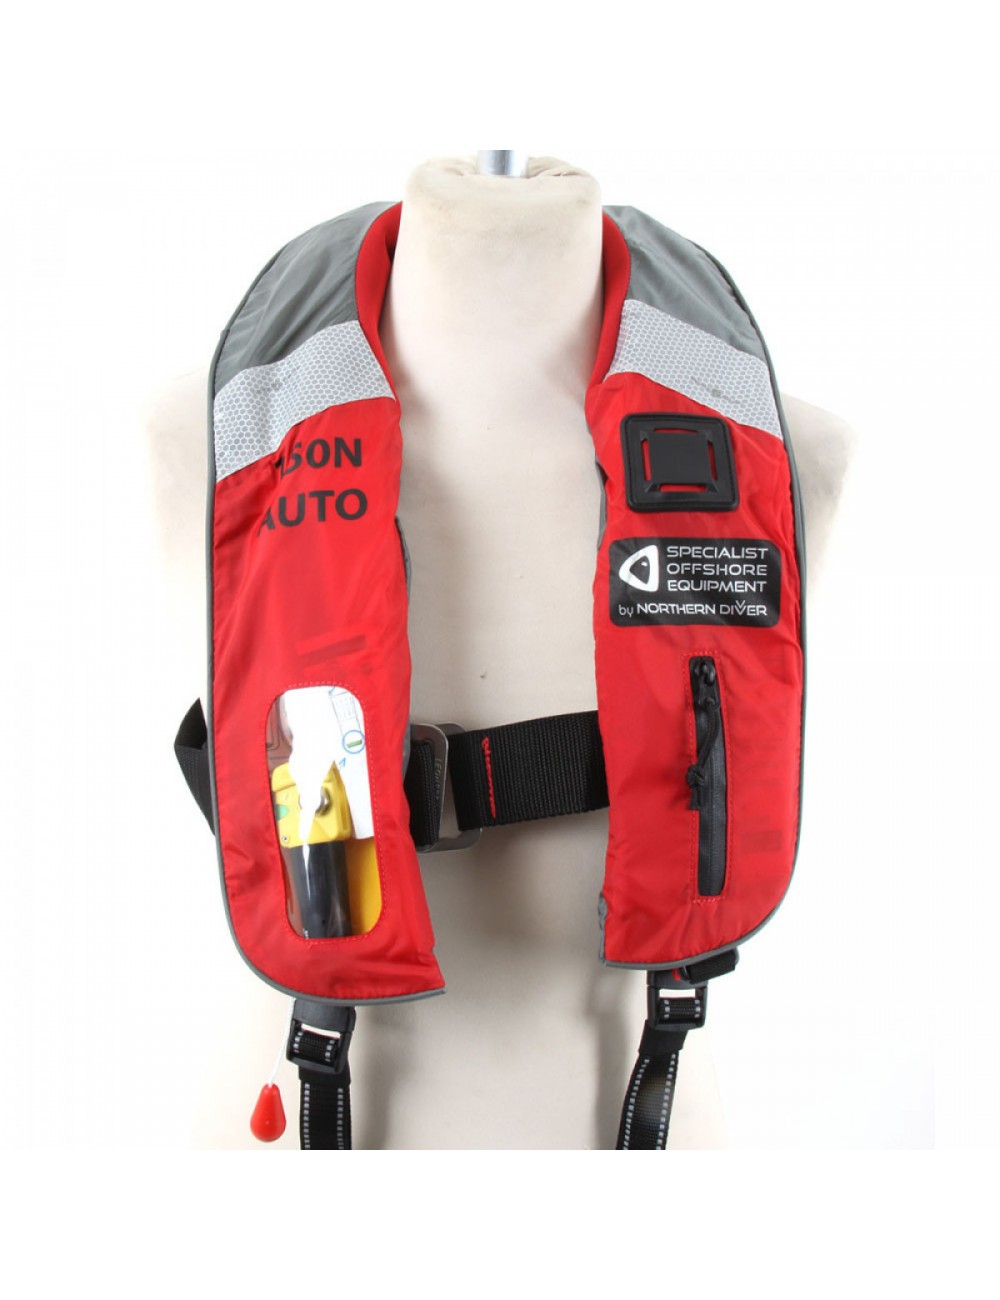 GC Rescuer 150n Lifejacket : Fishermans Clothing, Commercial